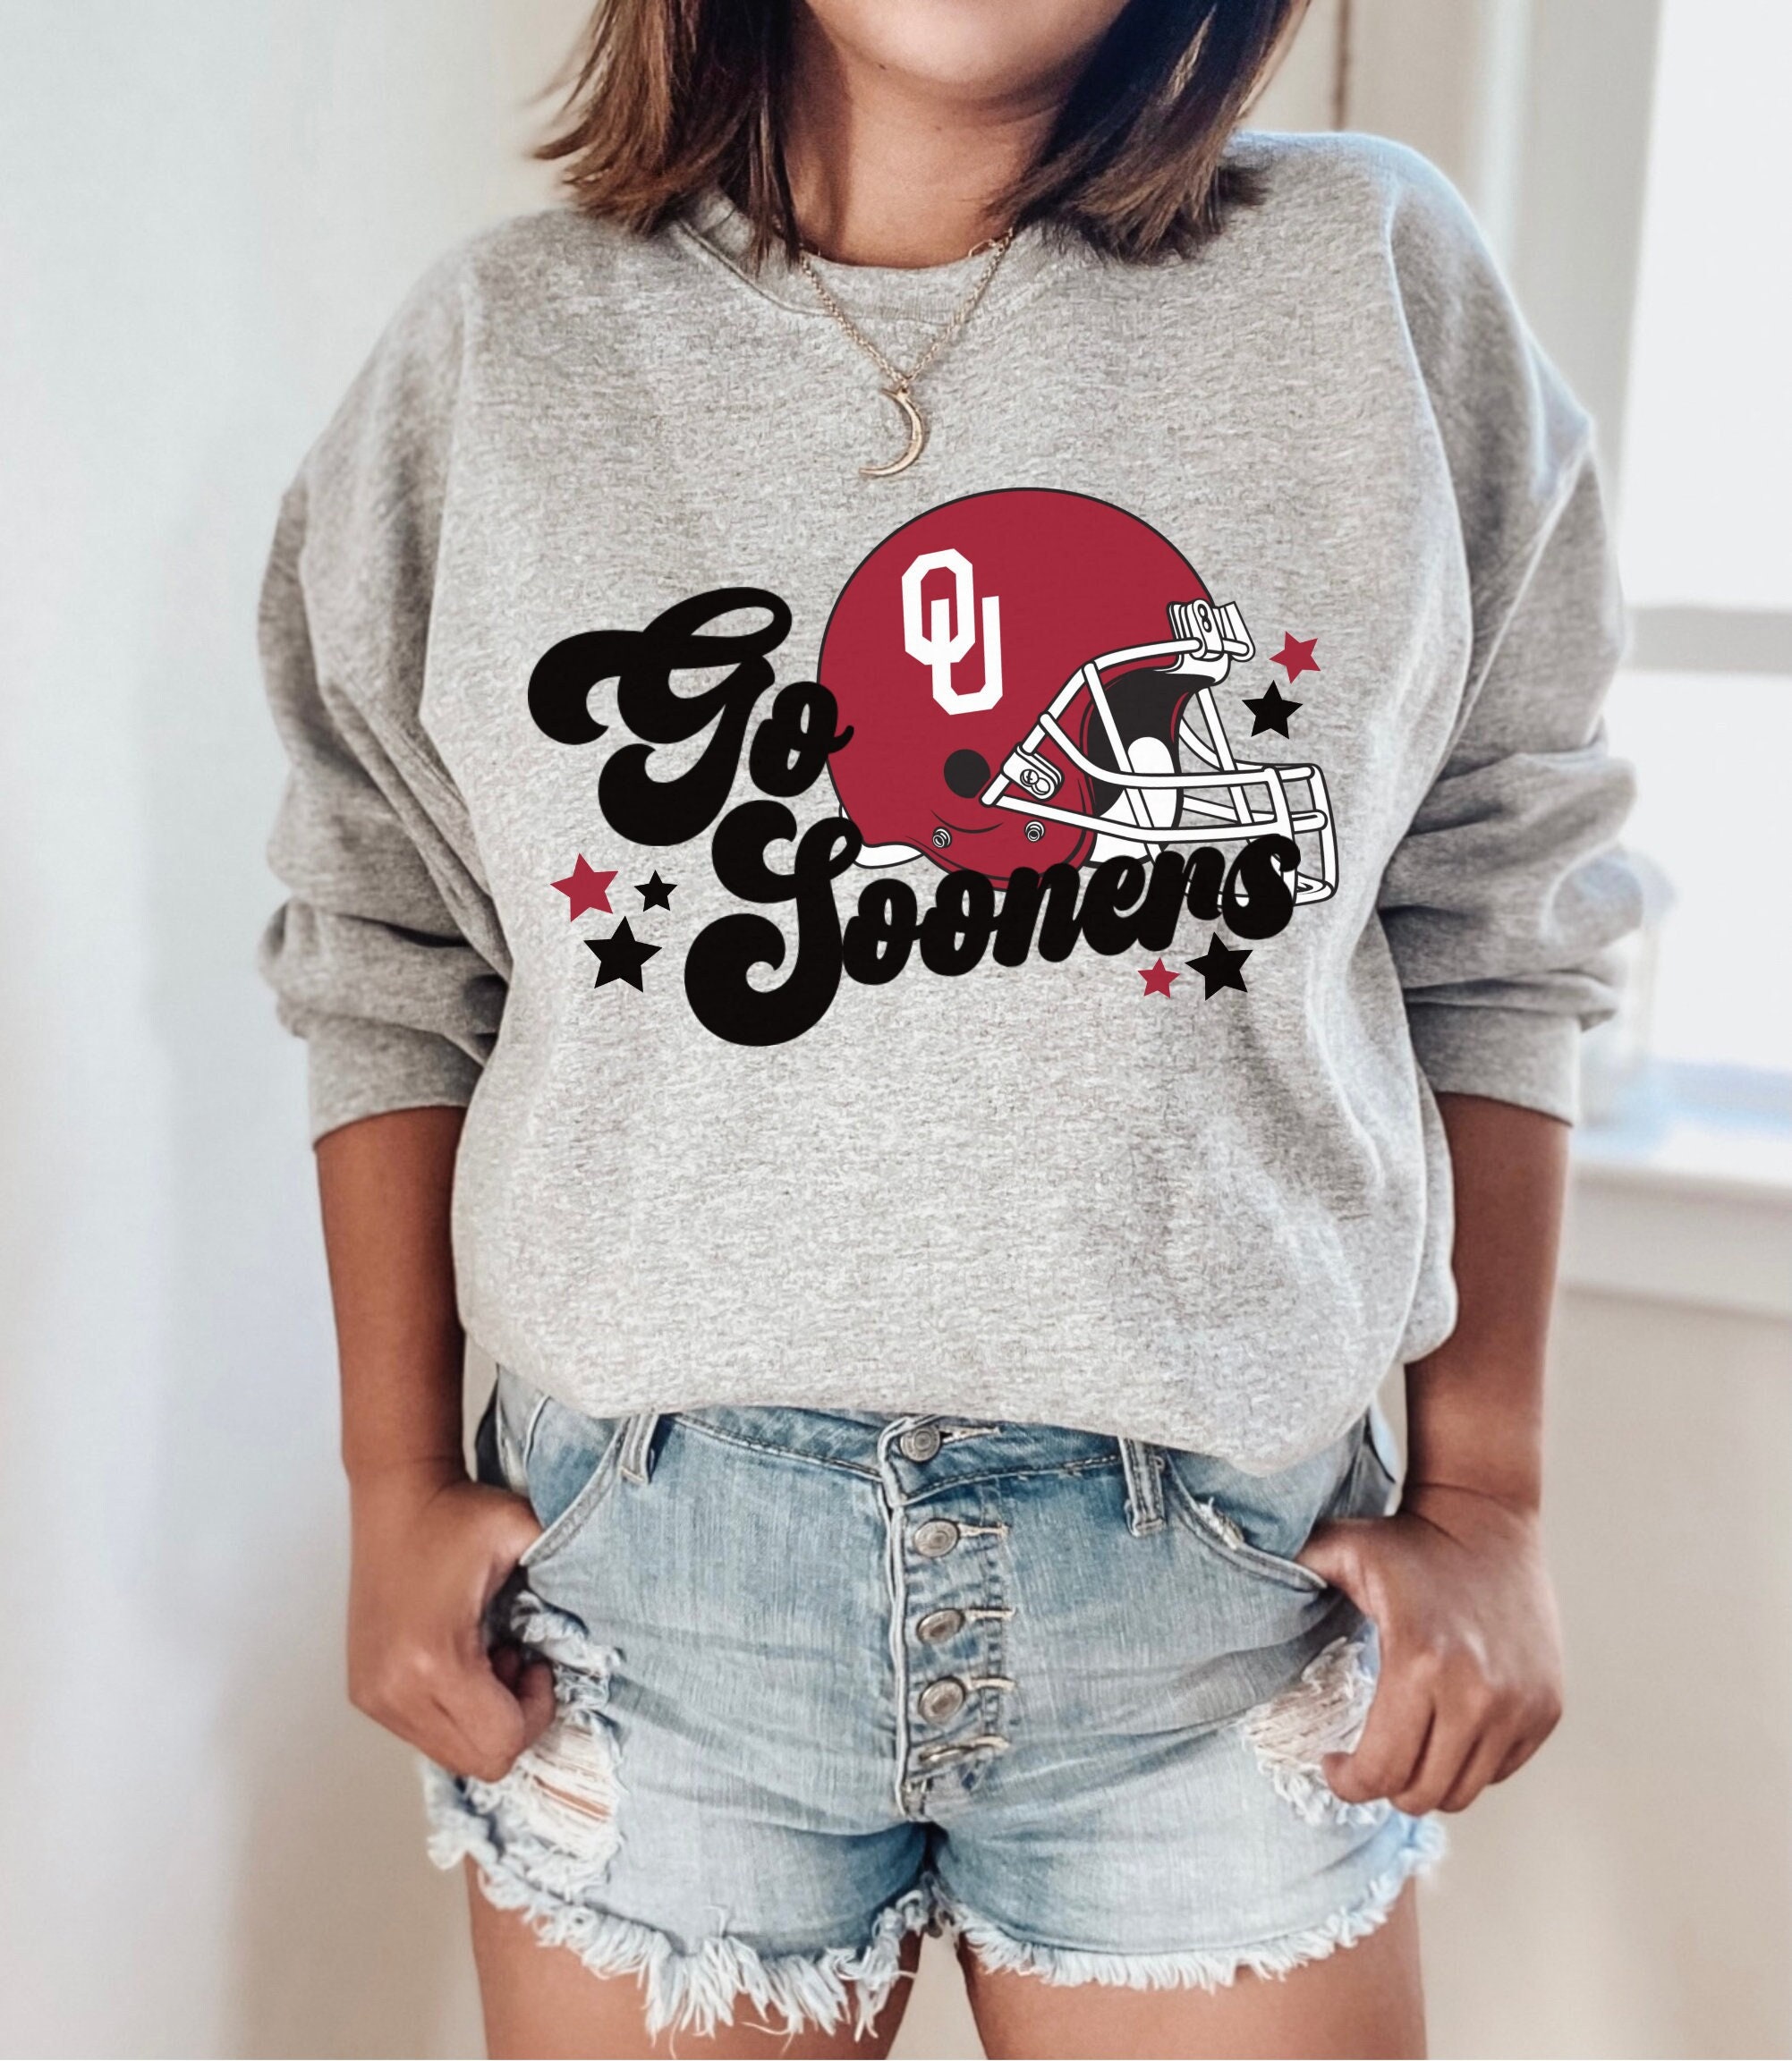 Discover Oklahoma Graphic Sweatshirt - OU Sooners Game Day